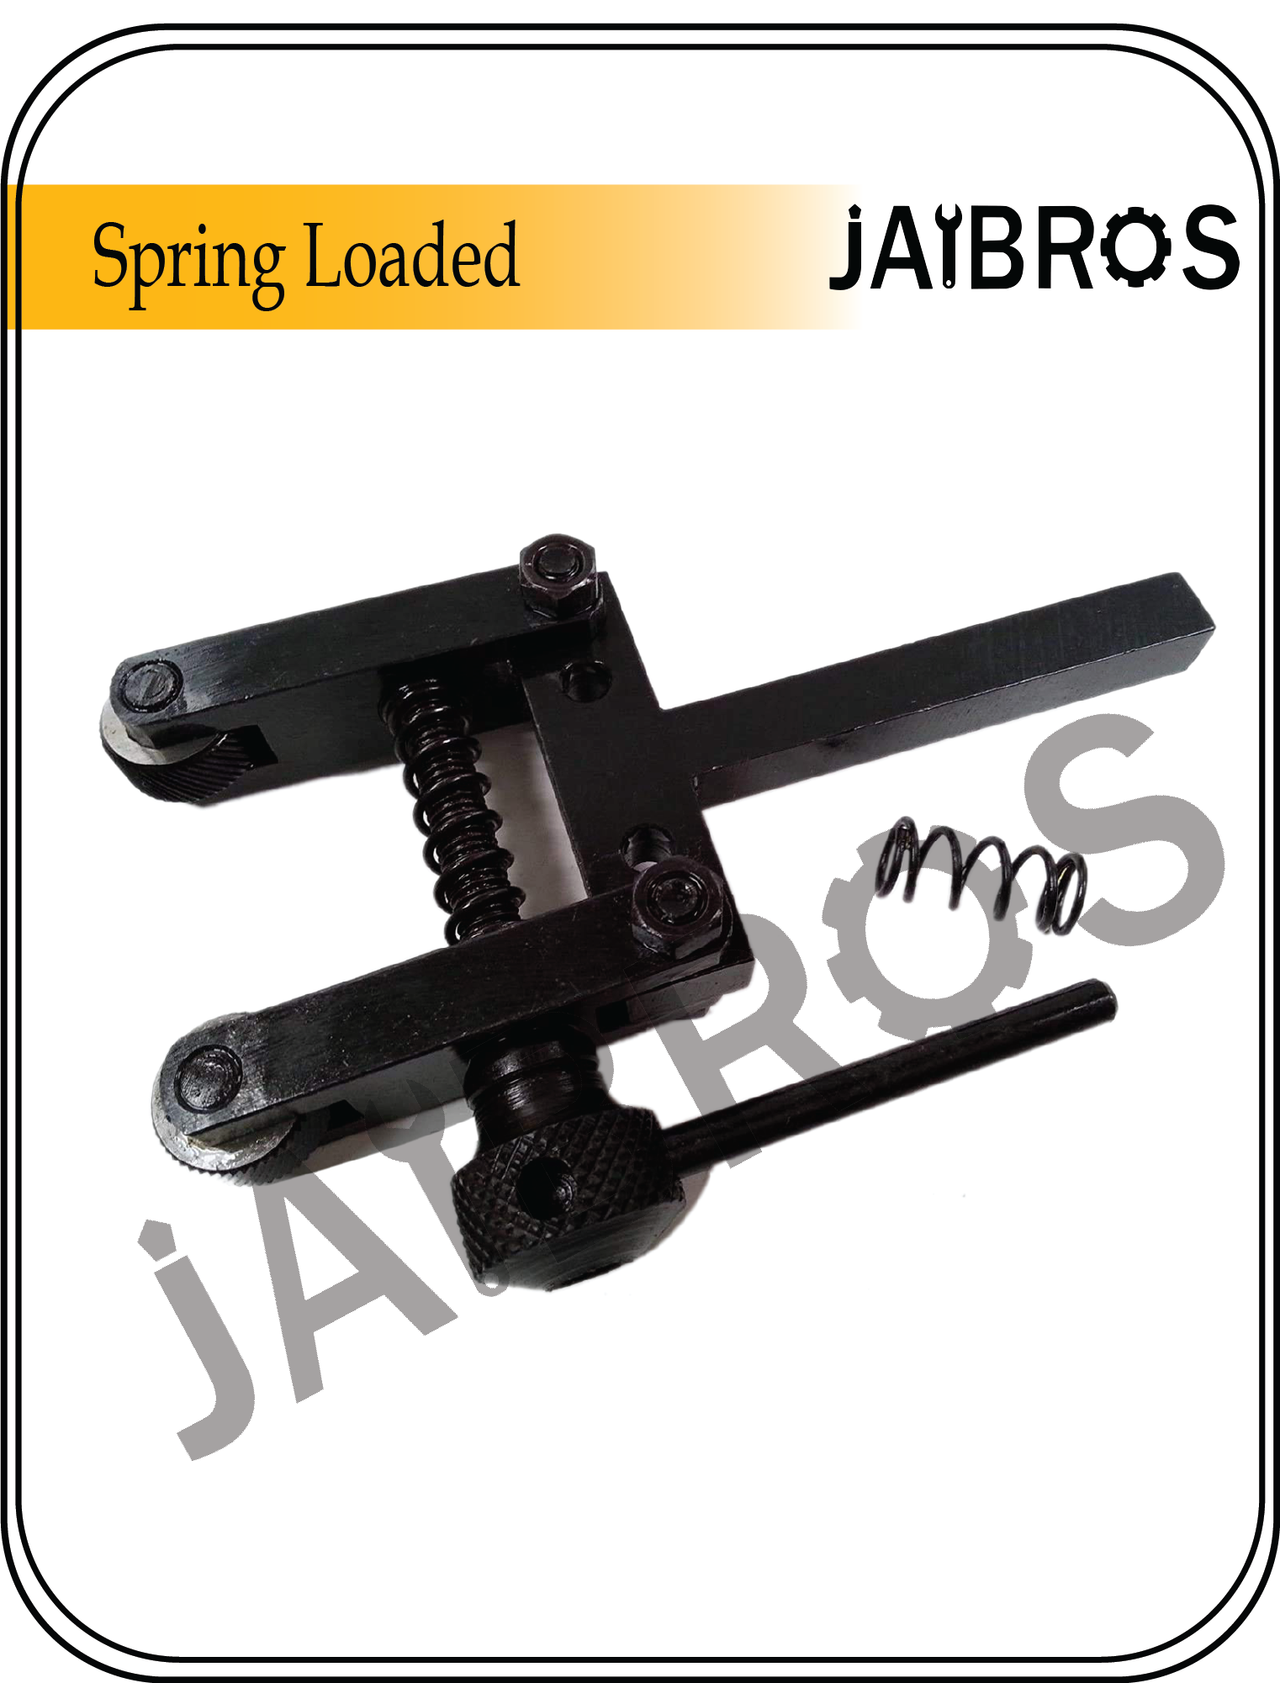 Spring Loaded Clamp Type Knurling Tool